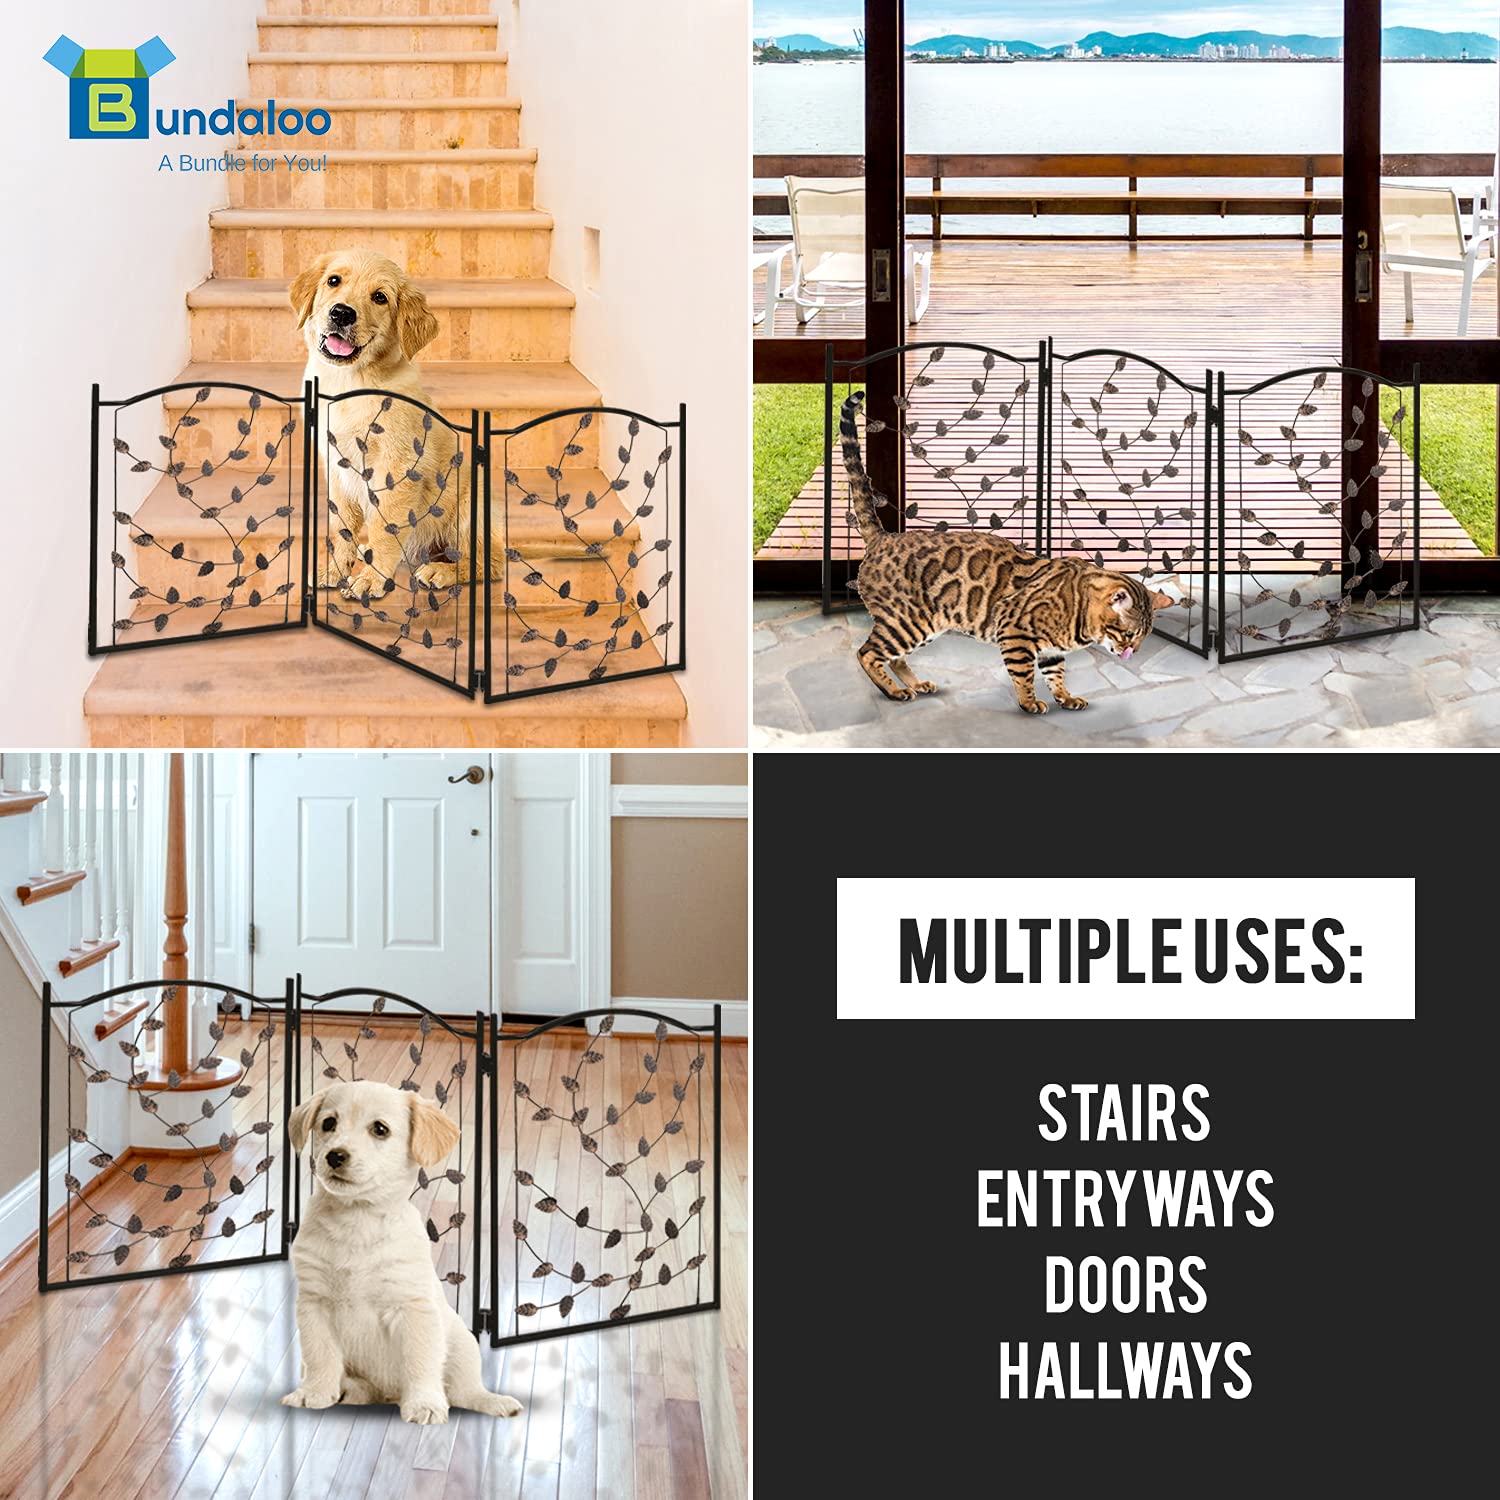 Bundaloo Freestanding Metal Folding Pet Gate | Large Portable Panels for Dog & Cat Security | Foldable Enclosure Gates for Puppies | Indoor & Outdoor Safety for Pets  - Very Good